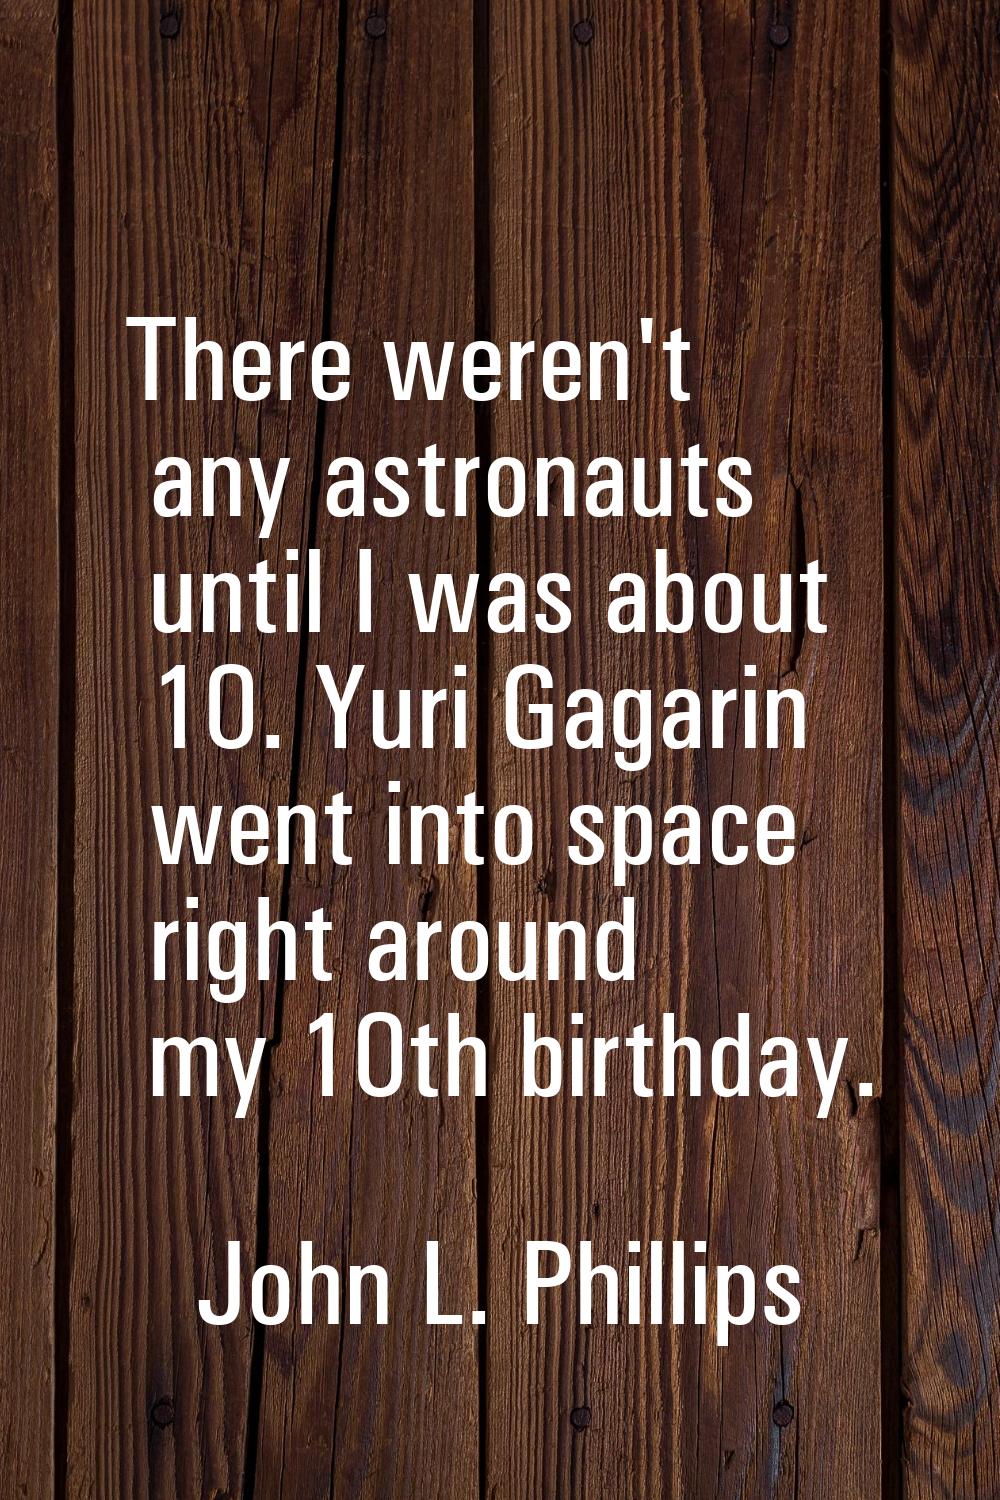 There weren't any astronauts until I was about 10. Yuri Gagarin went into space right around my 10t